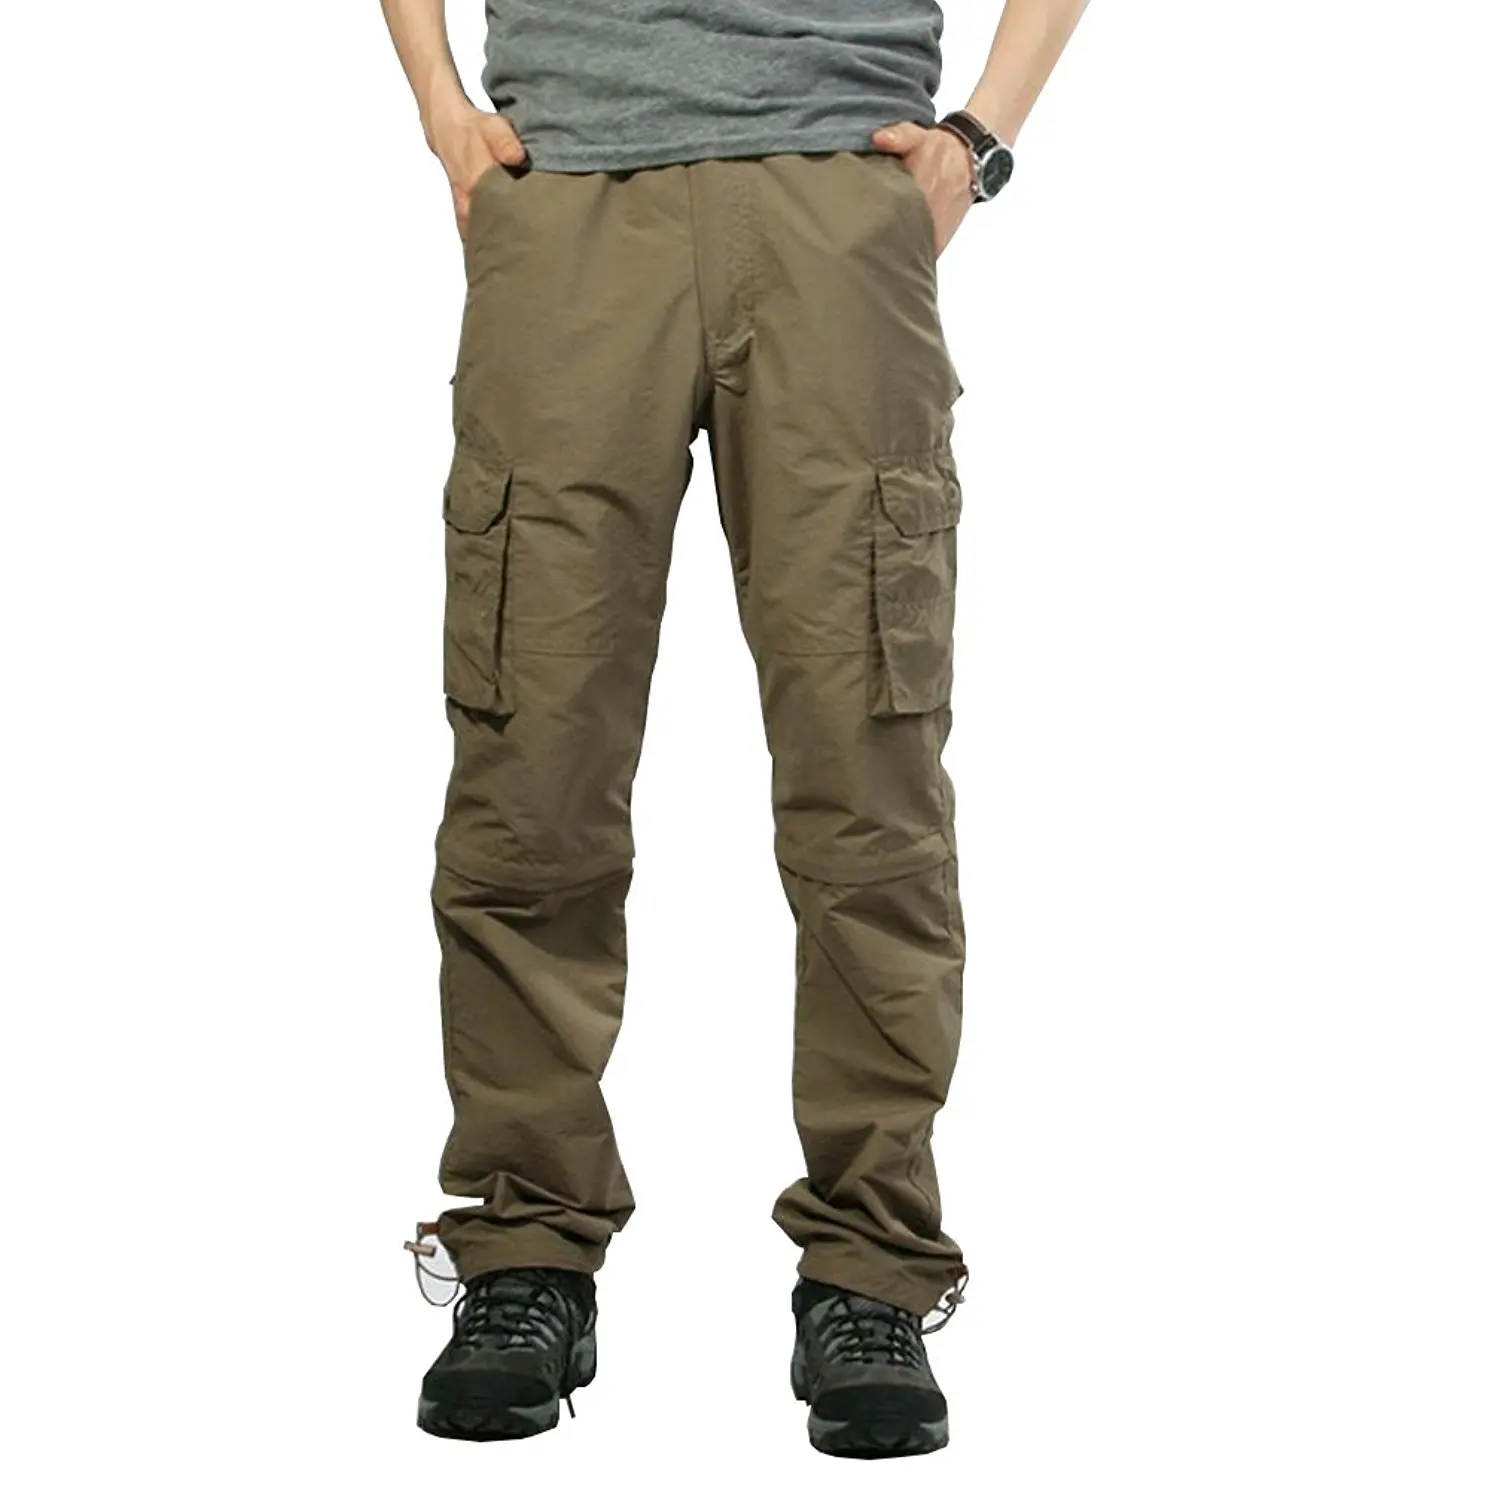 Buy CRYSULLY Men Convertible Pants Outdoor Lightweight Quick Drying ...